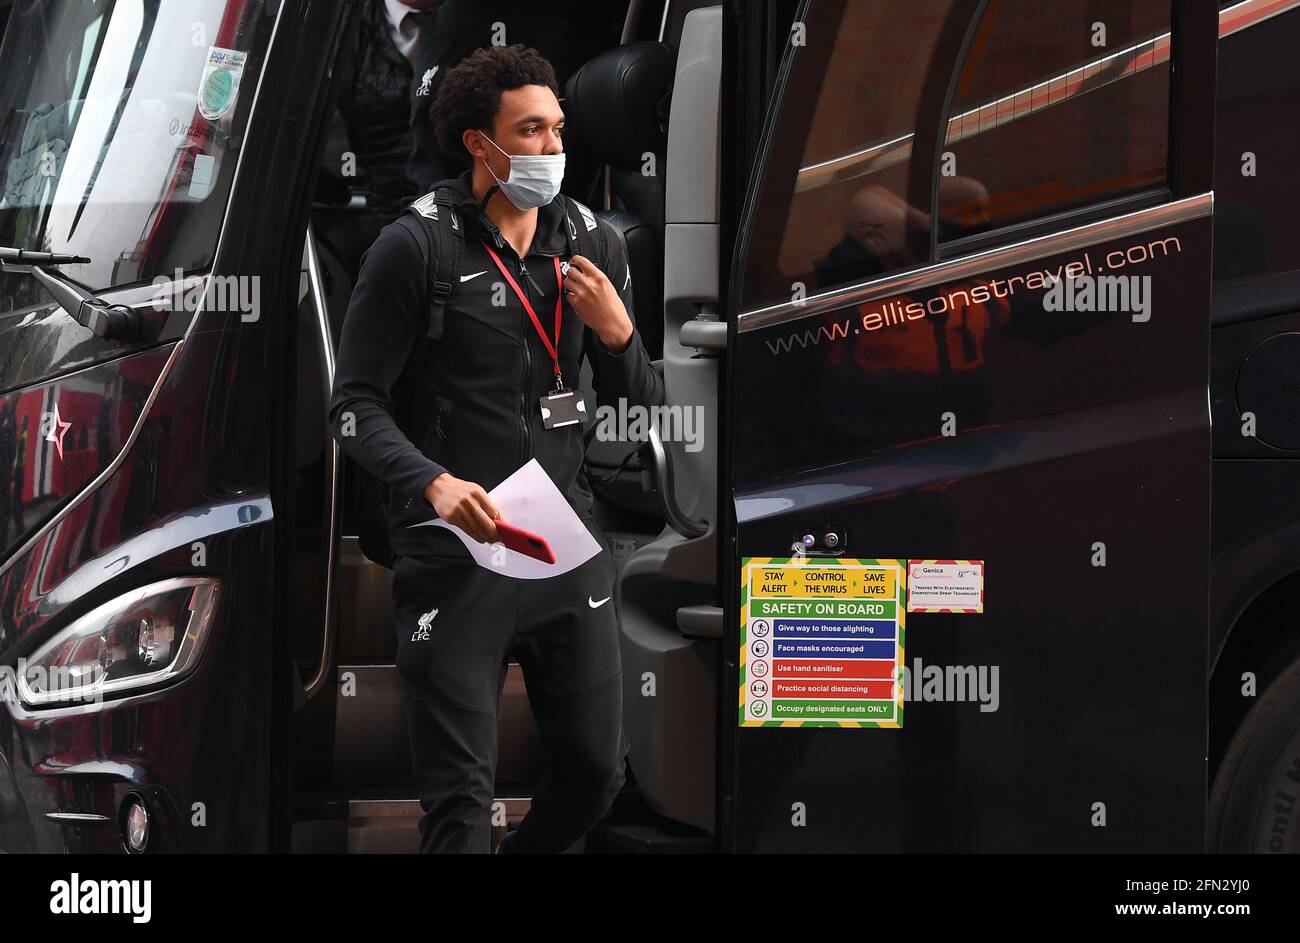 Liverpool's Trent Alexander-Arnold disembarks the team bus after arriving at the ground before the Premier League match at Old Trafford, Manchester. Picture date: Thursday May 13, 2021. Stock Photo